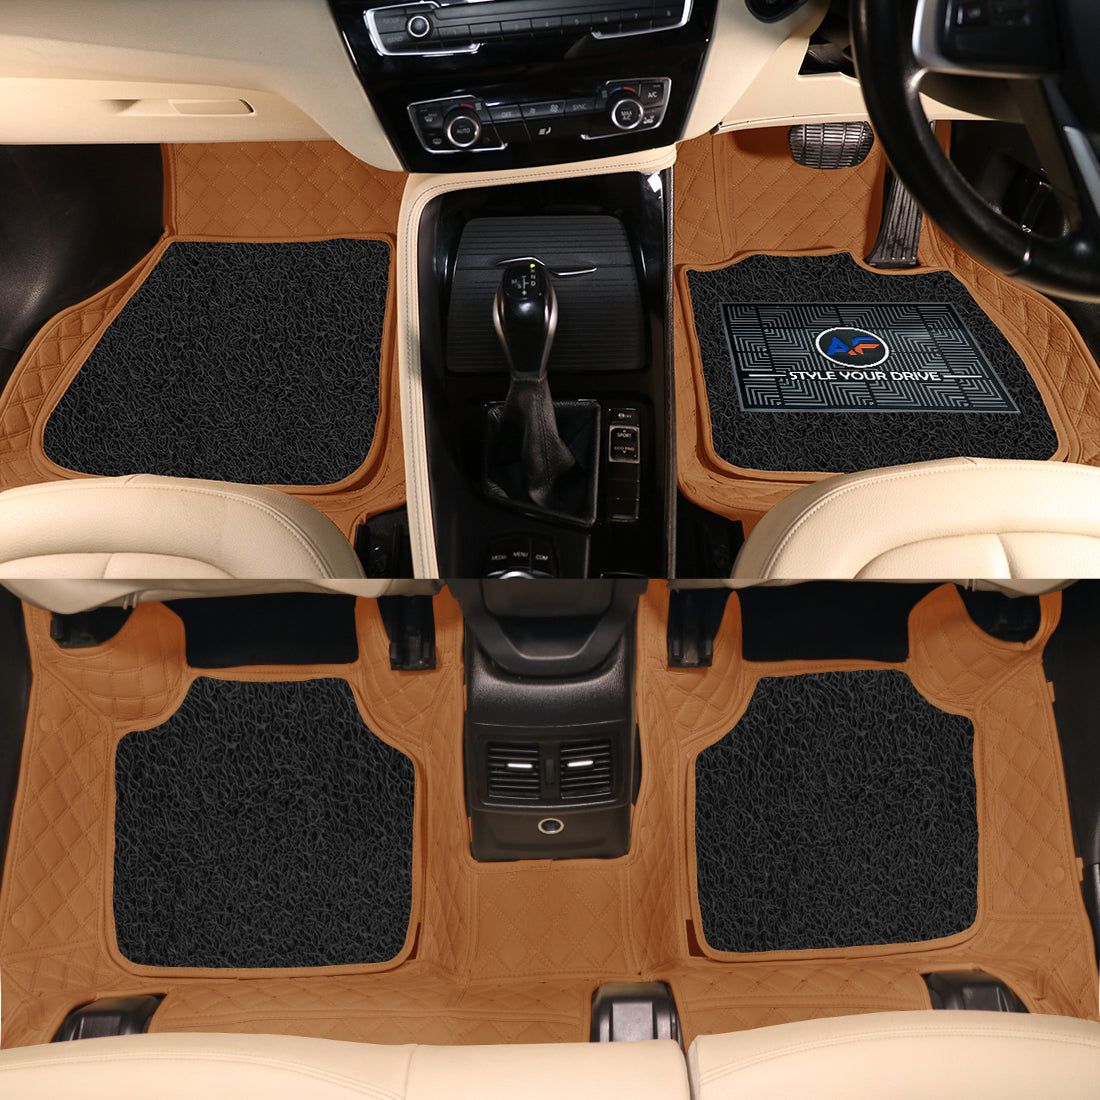 Mercedes GLC Coupe 300d 4MATIC 2020 7D Luxury Car Mat, All Weather Proof, Anti-Skid, 100% Waterproof & Odorless with Unique Diamond Fish Design (24mm Luxury PU Leather, 2 Rows)